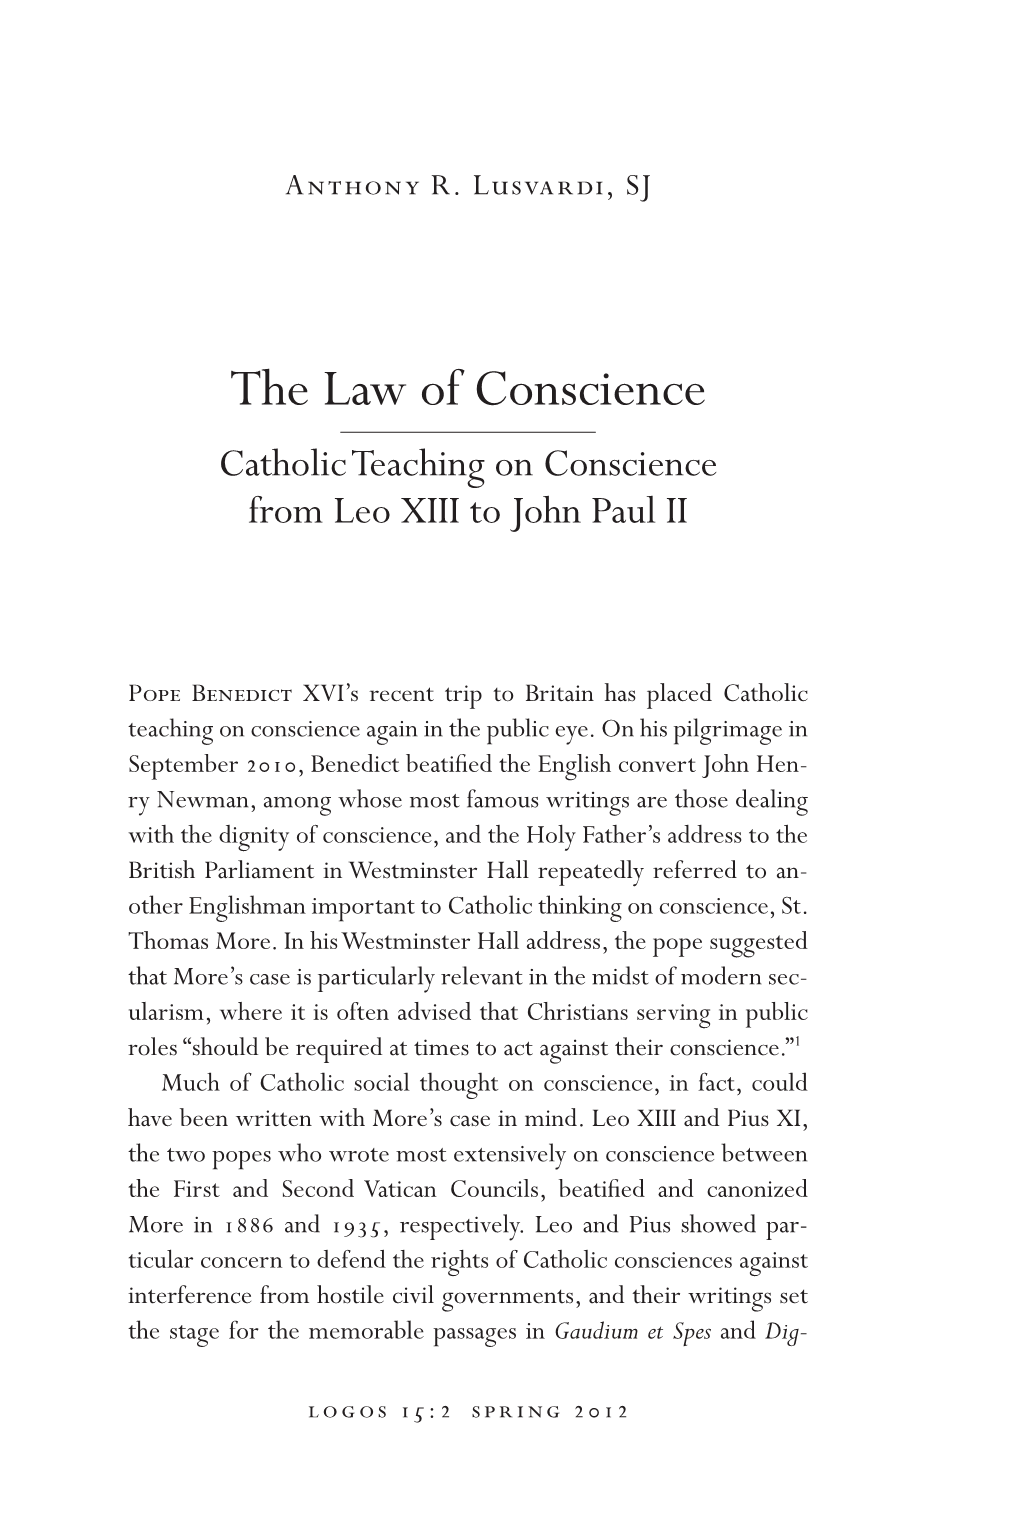 The Law of Conscience Catholic Teaching on Conscience from Leo XIII to John Paul II